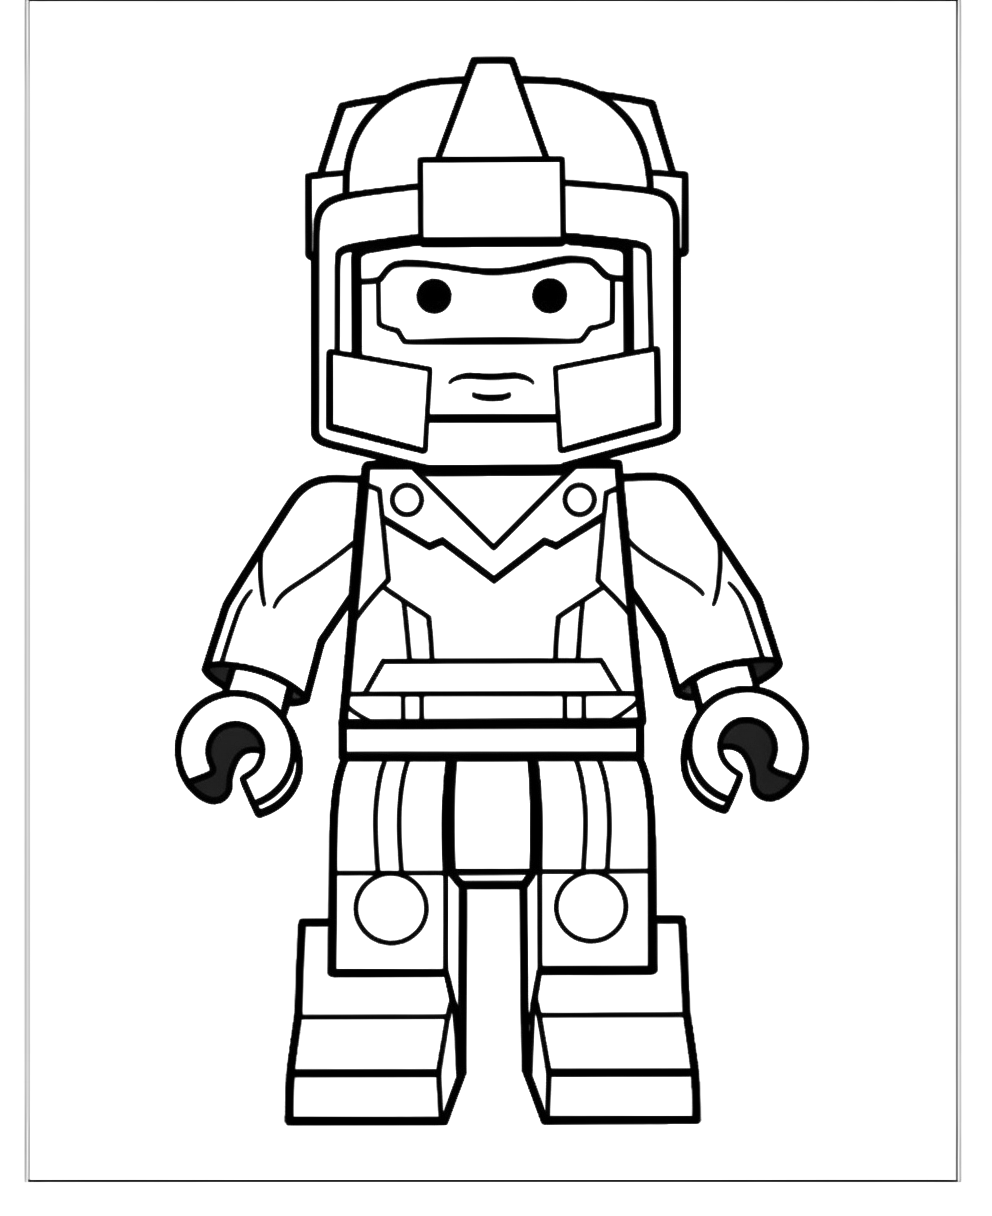 Roblox Coloring Page - Coloring Pages Child